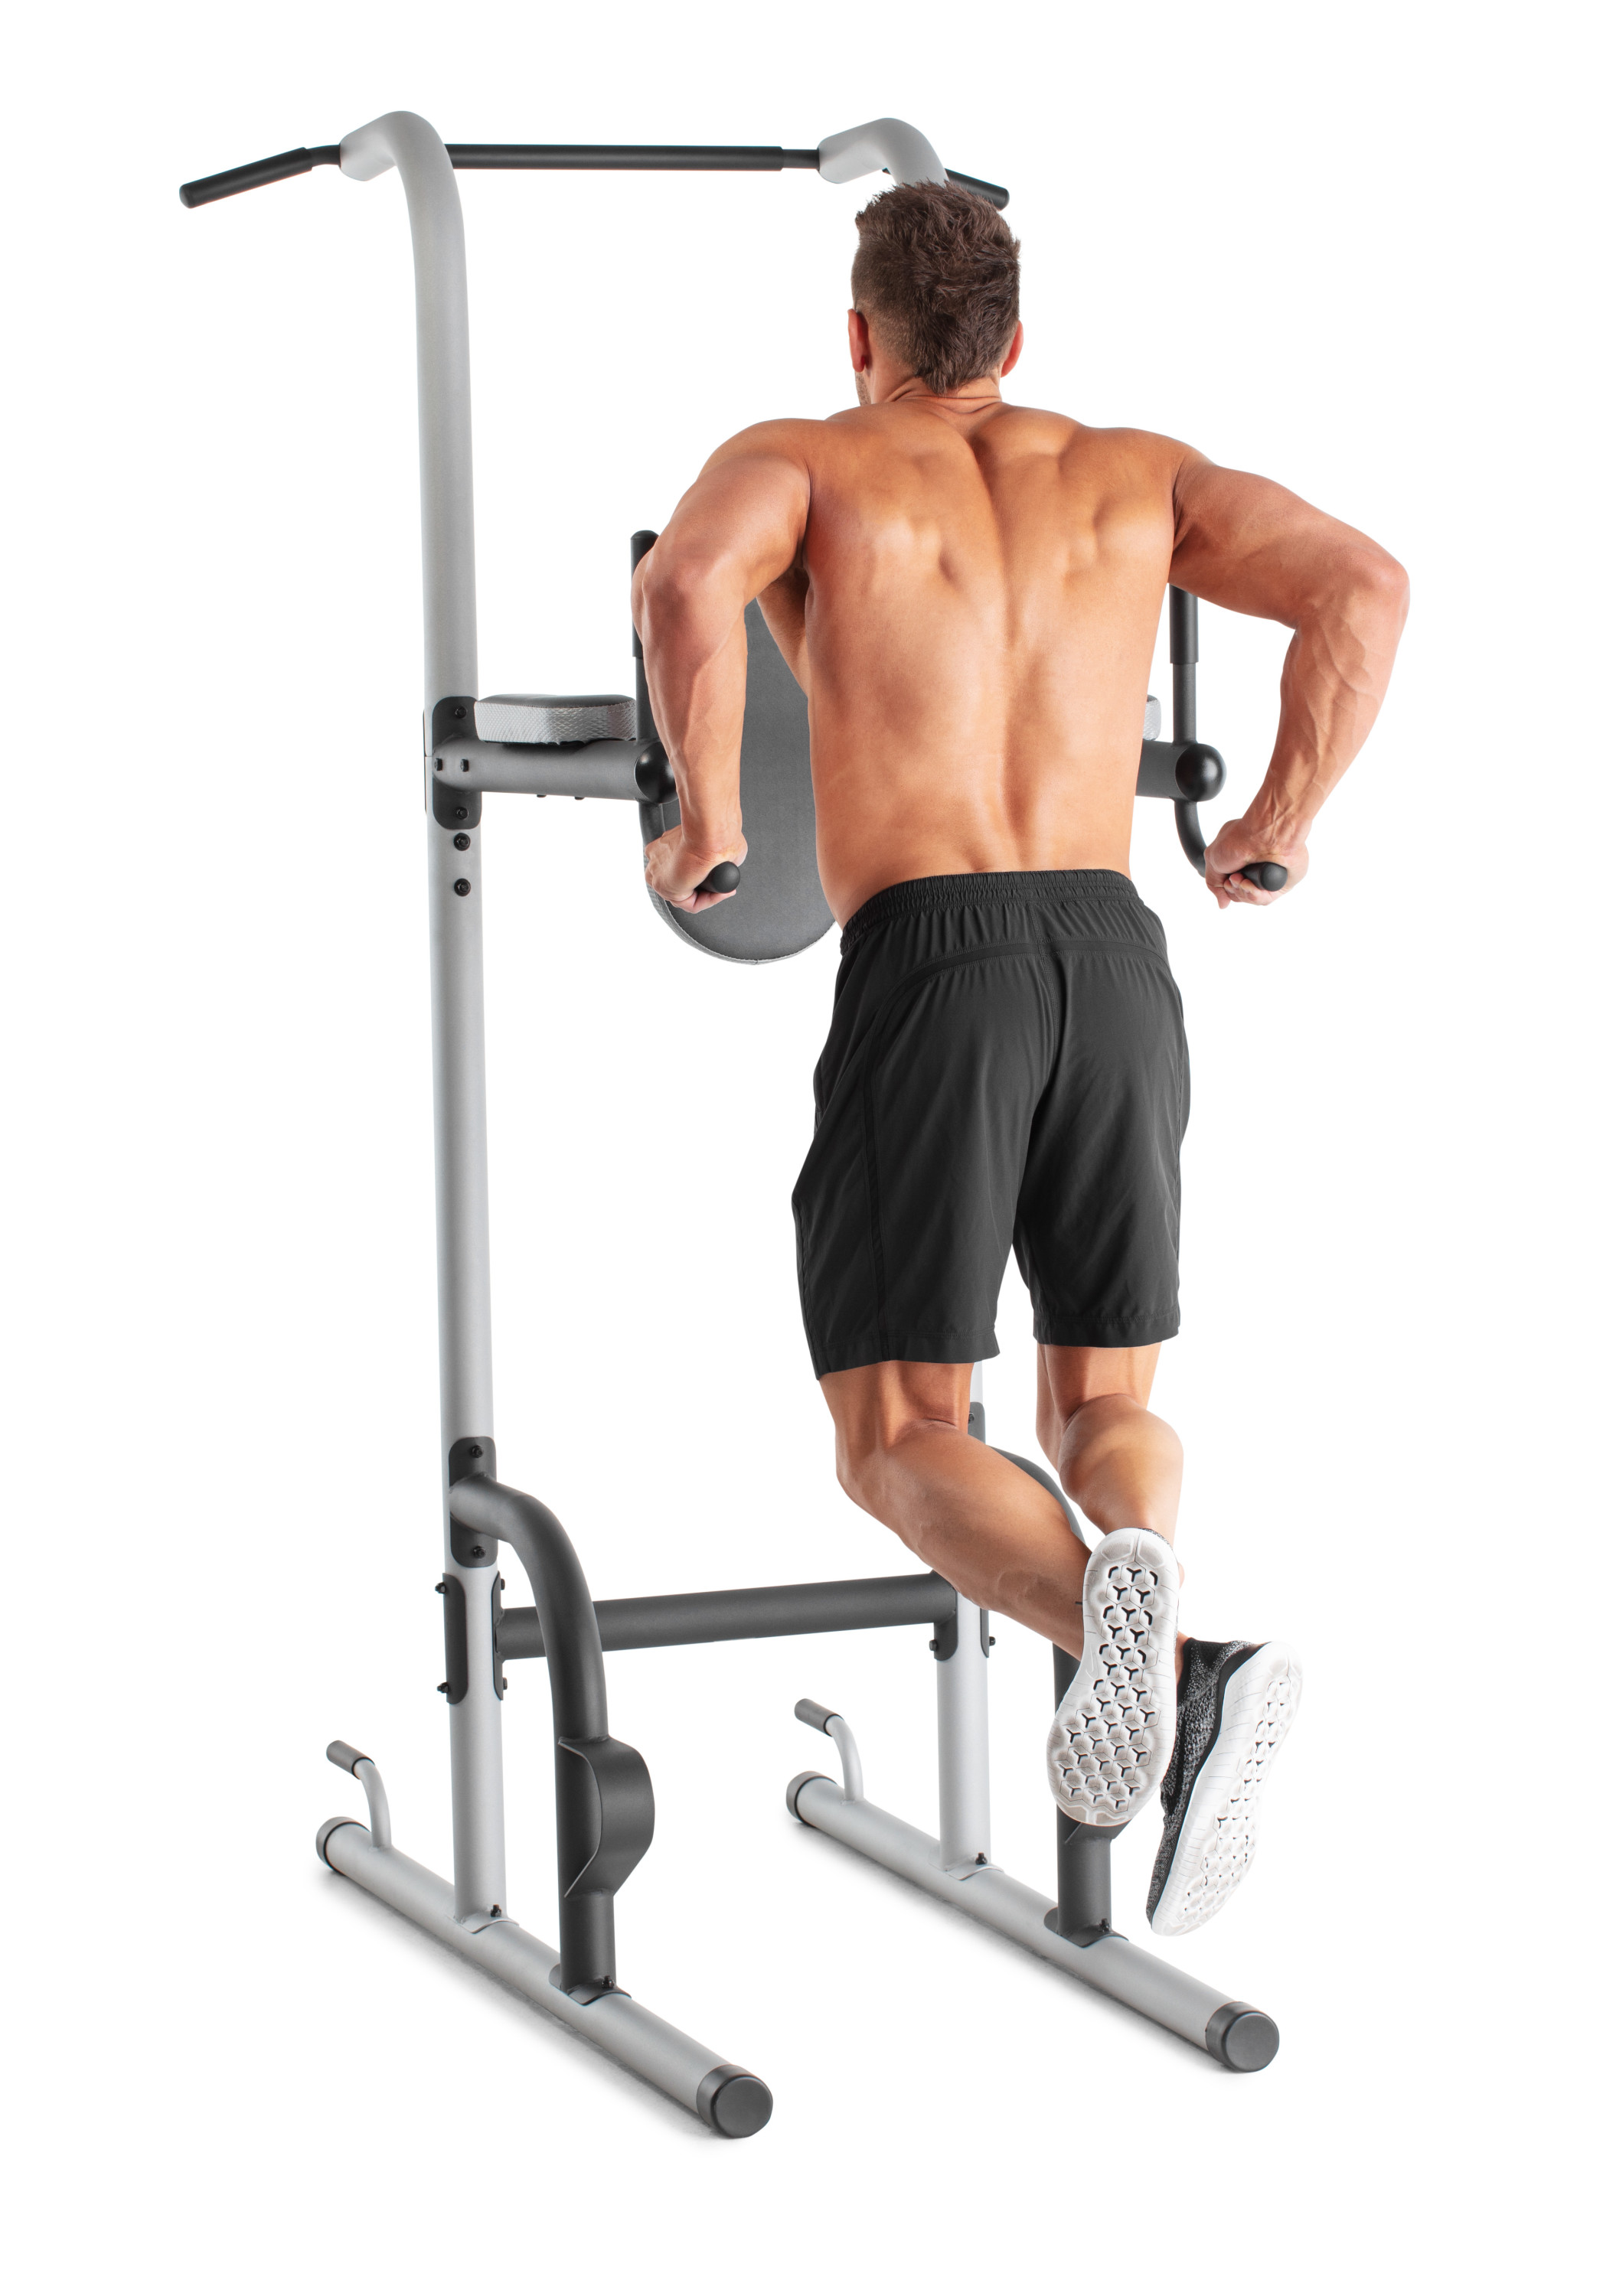 ProForm XR 10.9 Power Tower with Push-Up, Pull-Up & Dip Stations, 300 Lb. Weight Limit - image 3 of 9